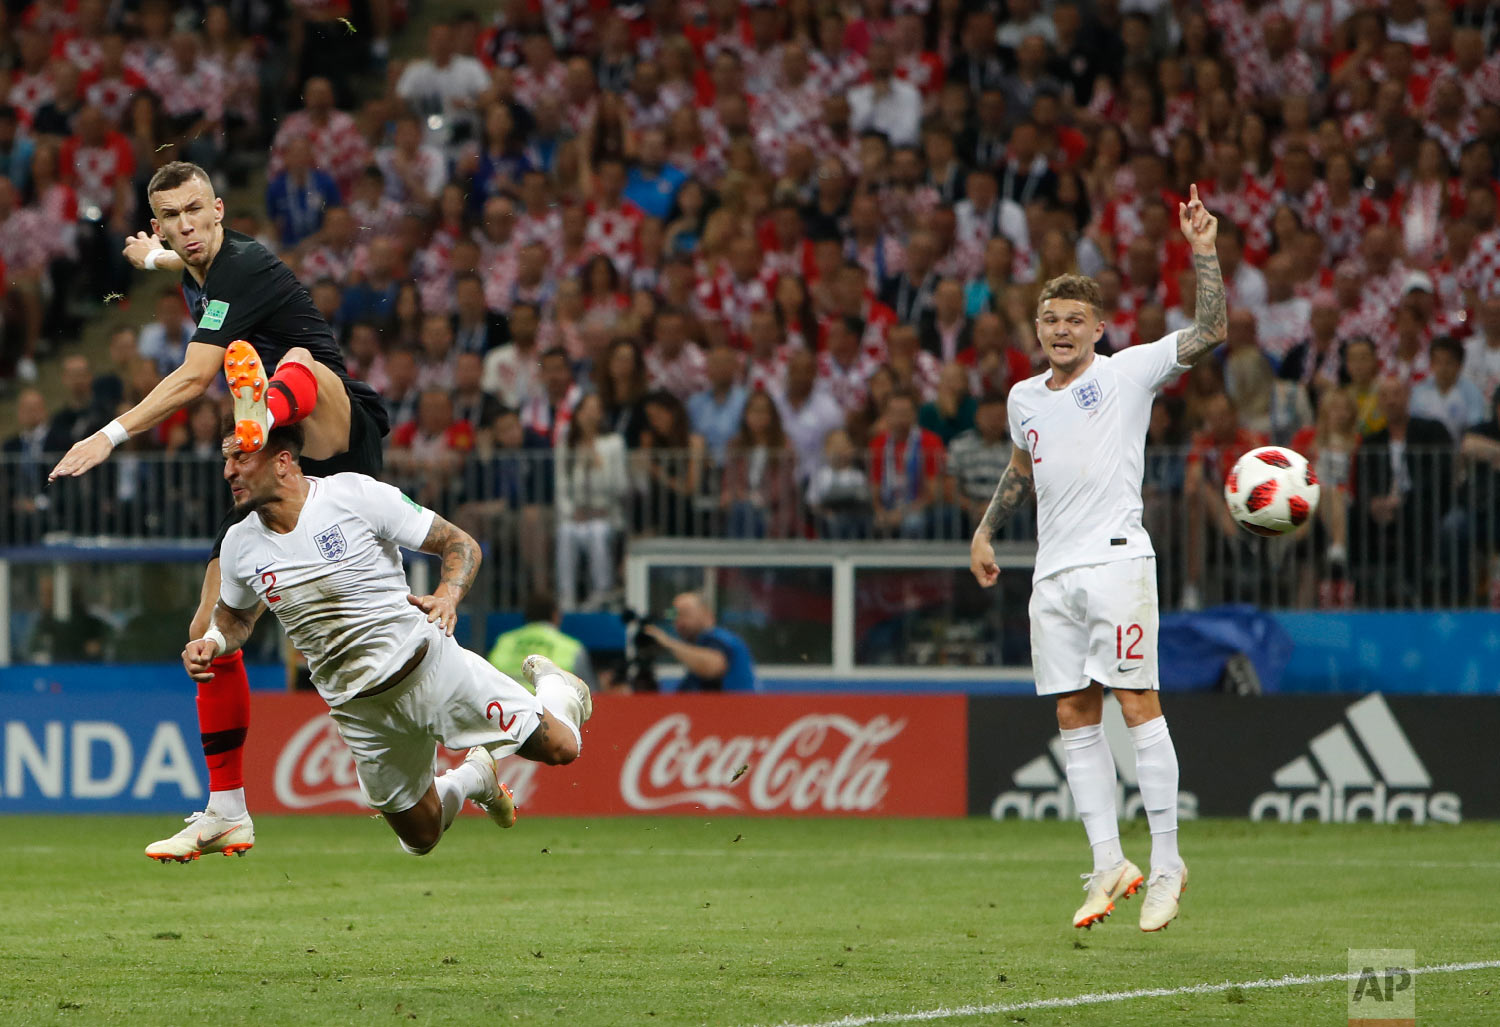  Croatia's Ivan Perisic scores his side's opening goal during the semifinal match between Croatia and England at the 2018 soccer World Cup in the Luzhniki Stadium in, Moscow, Russia, Wednesday, July 11, 2018. (AP Photo/Alastair Grant) 